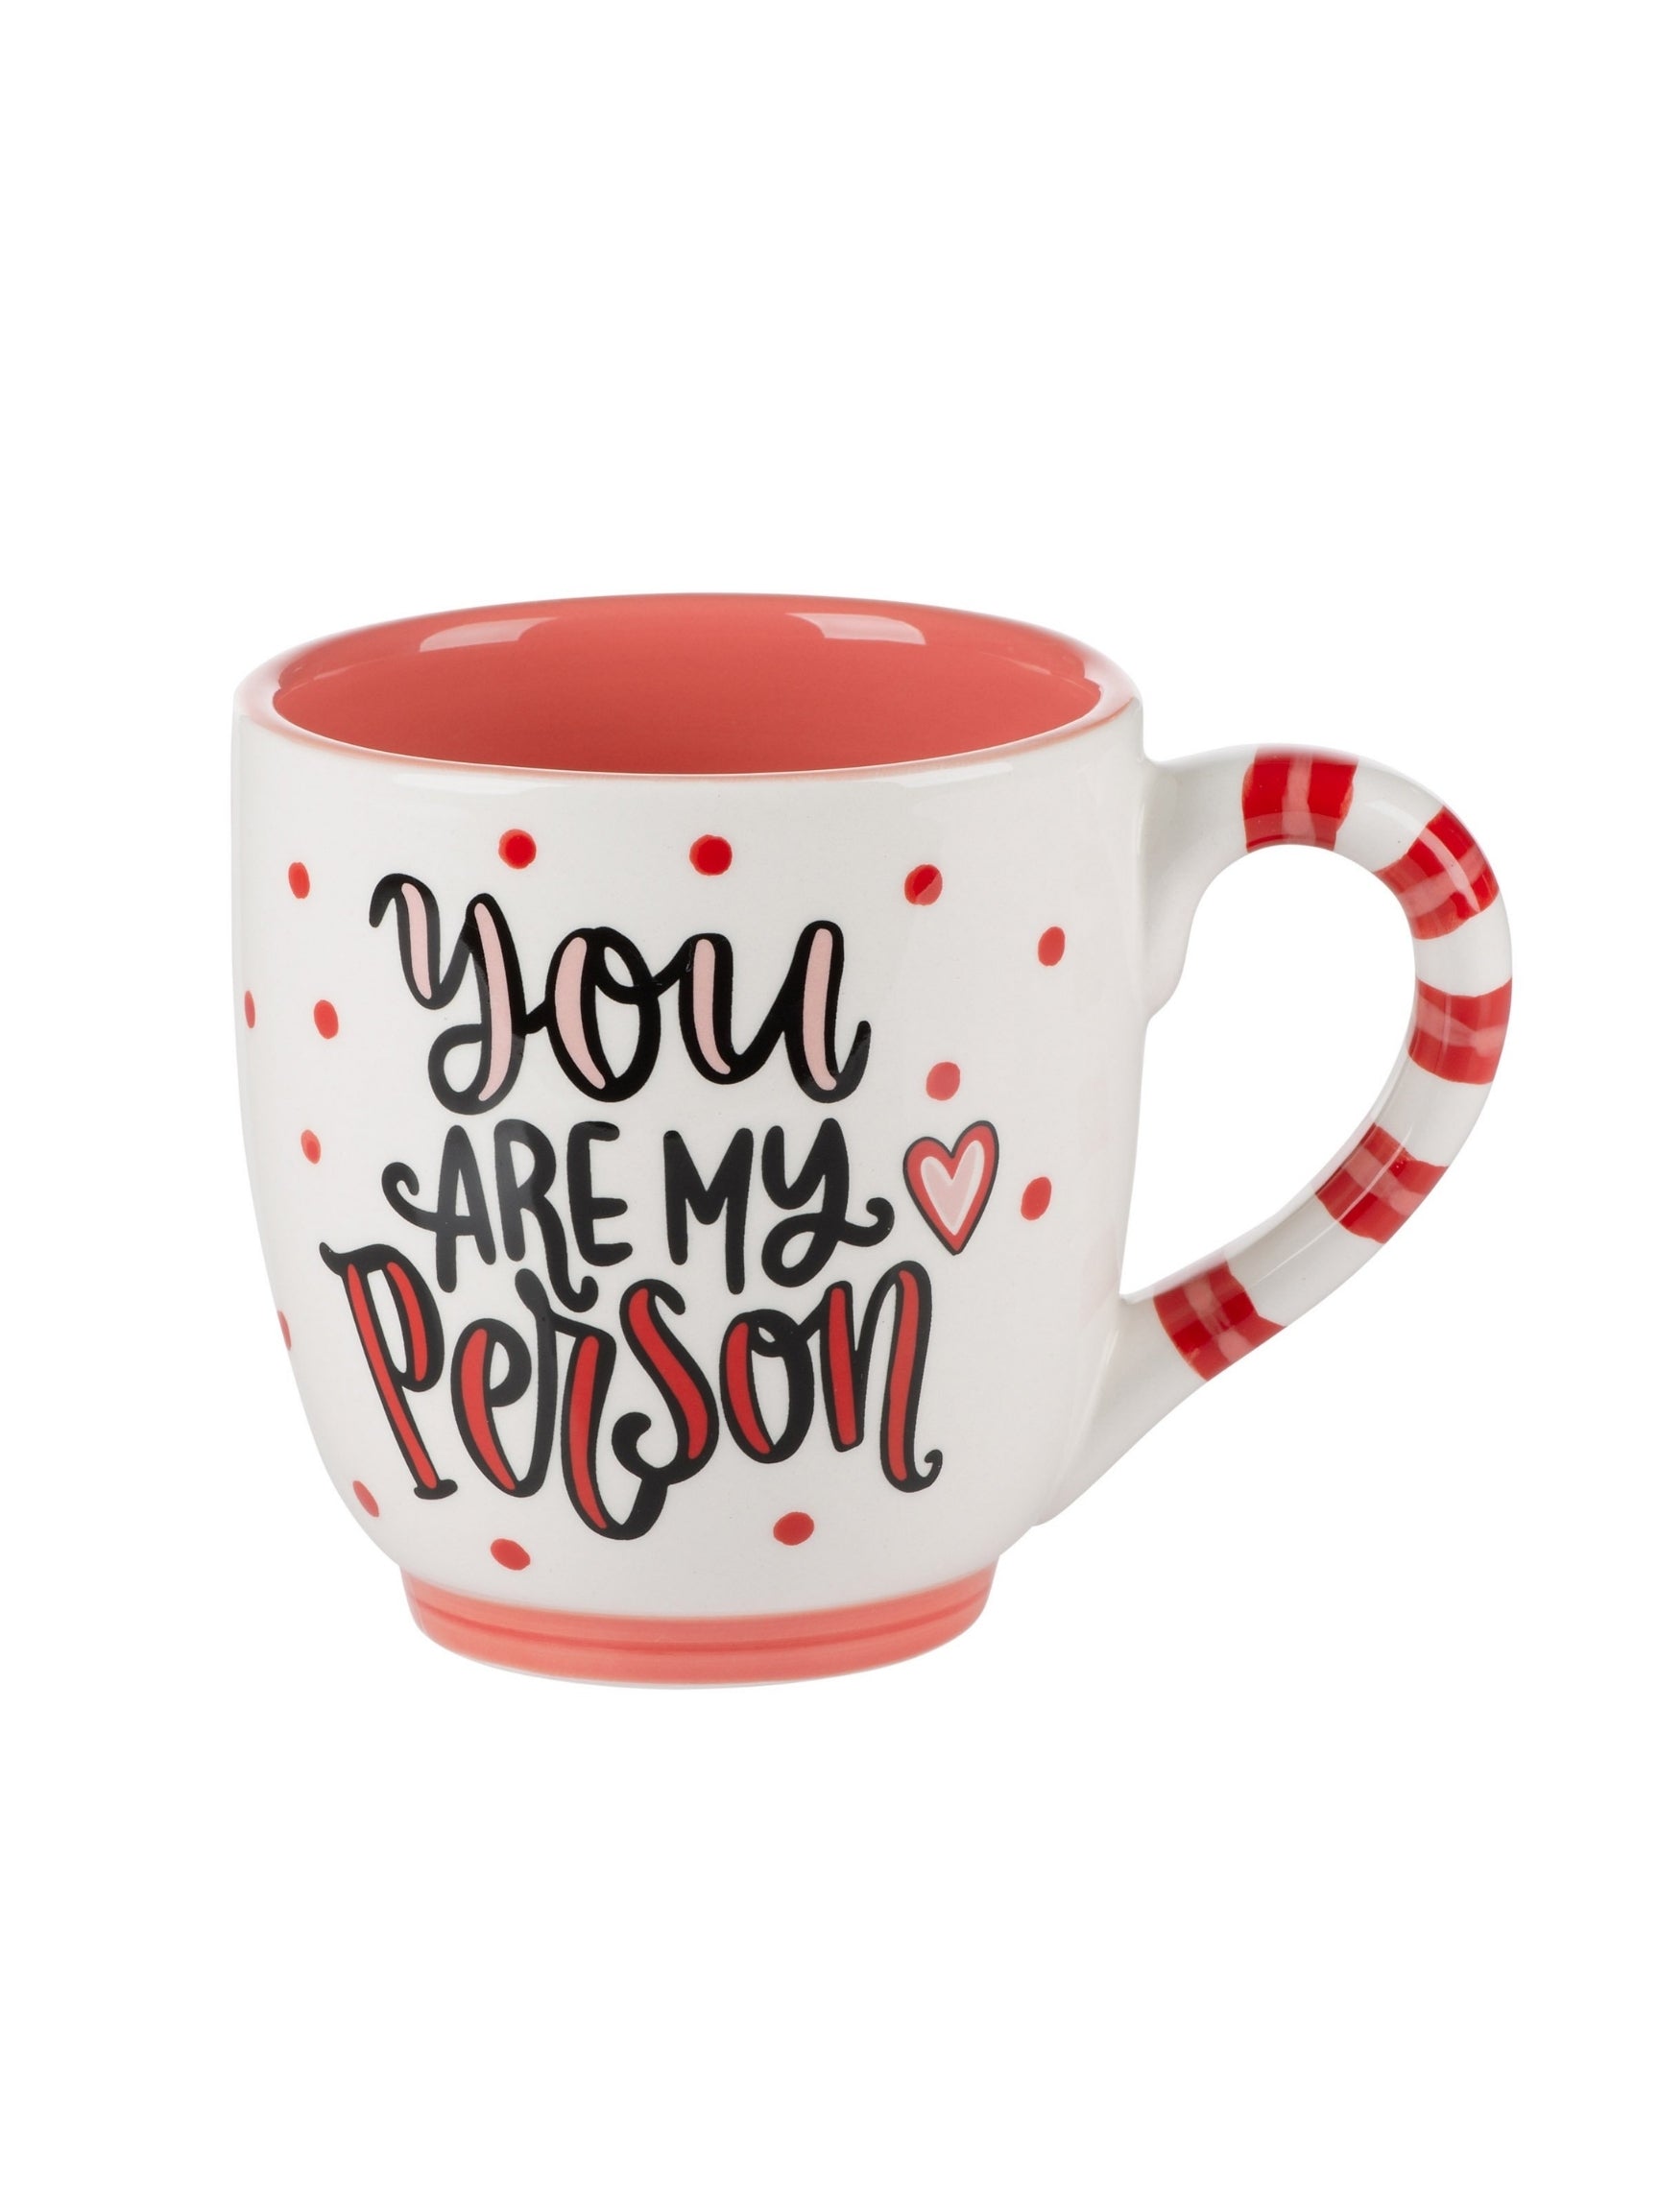 You Are My Person Mug